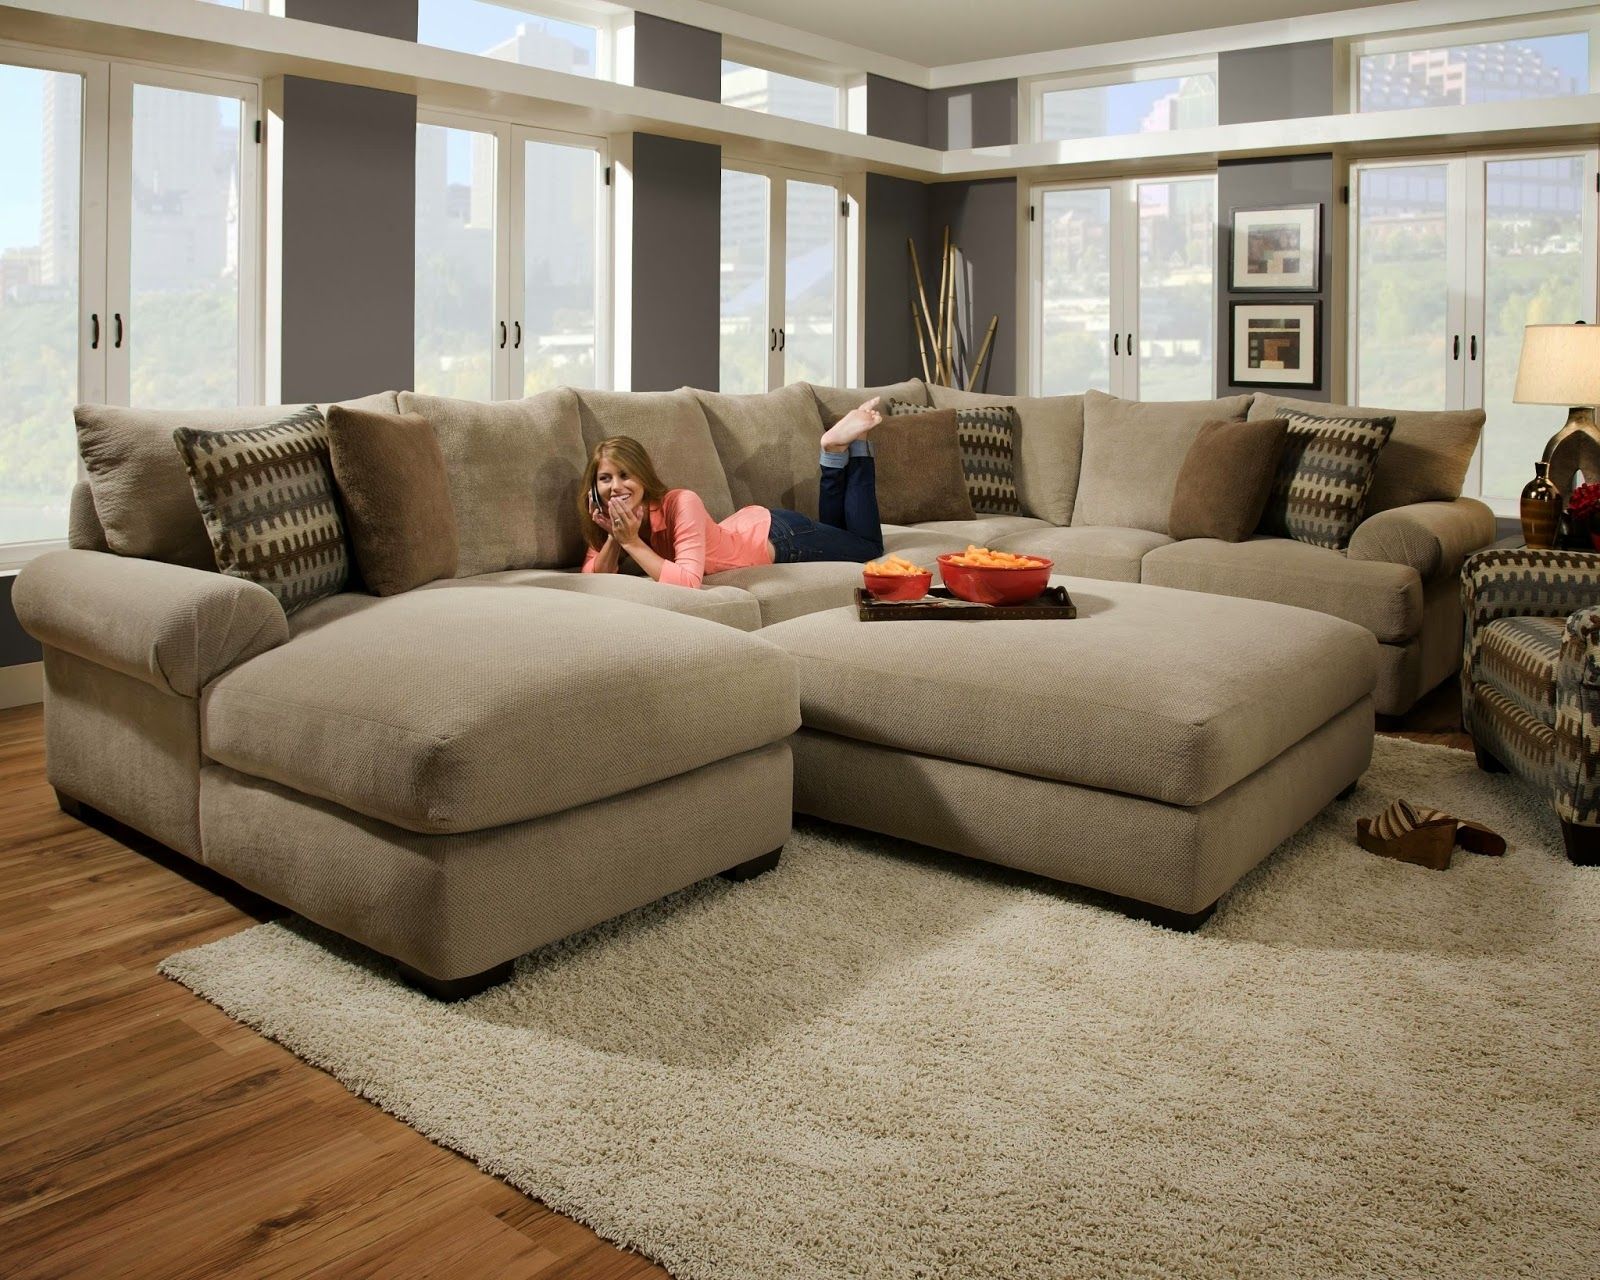 Sectional Sofa With Ottoman – Foter Within Sofas With Ottomans In Brown (View 4 of 15)